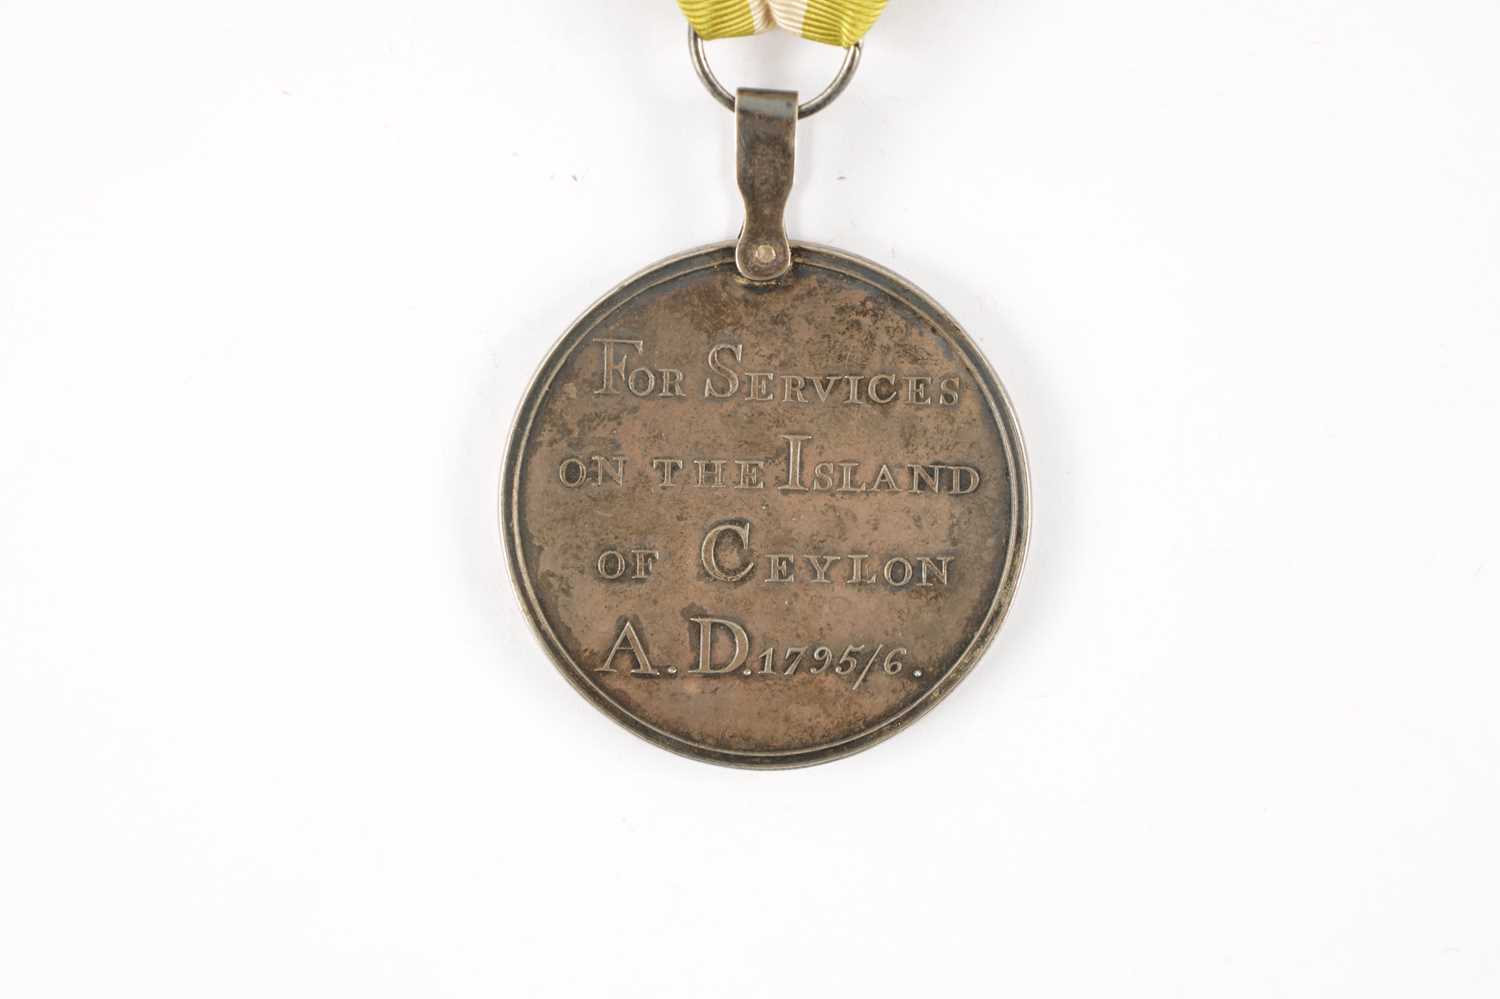 AN EAST INDIAN COMPANY CEYLON SILVER MEDAL 1795-96. - Image 2 of 4